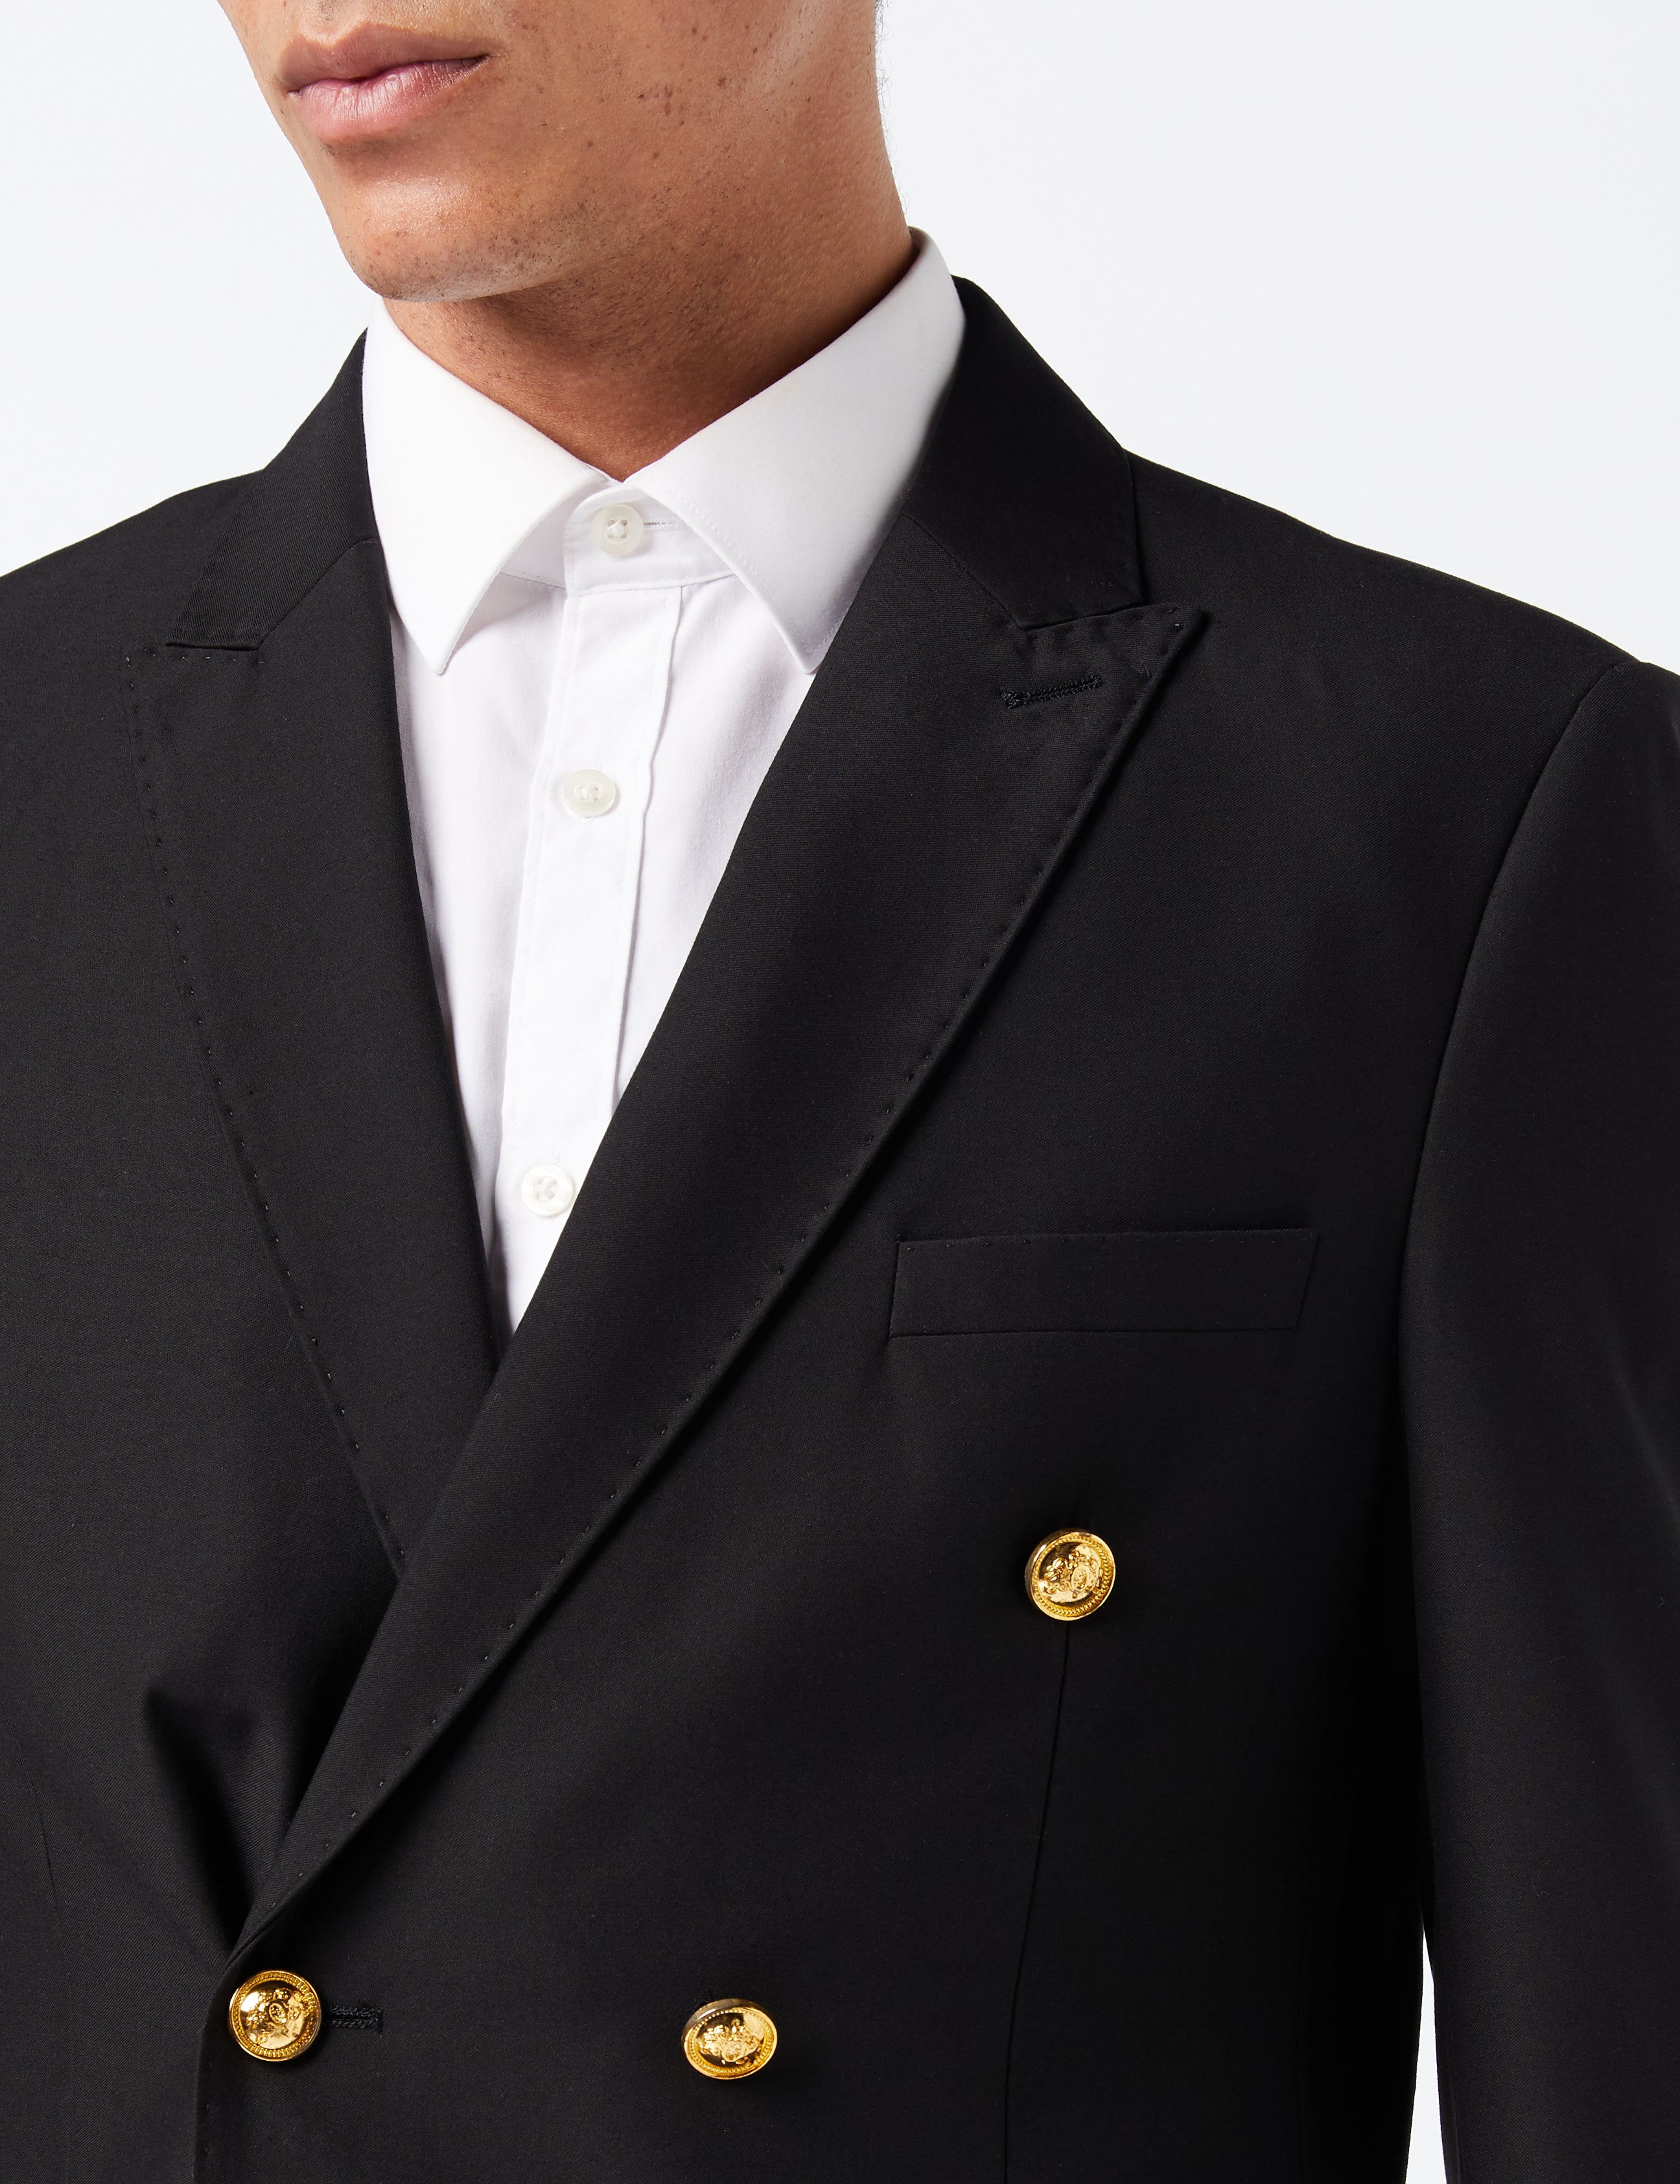 DOUBLE BREASTED GOLD BUTTON SUIT IN BLACK